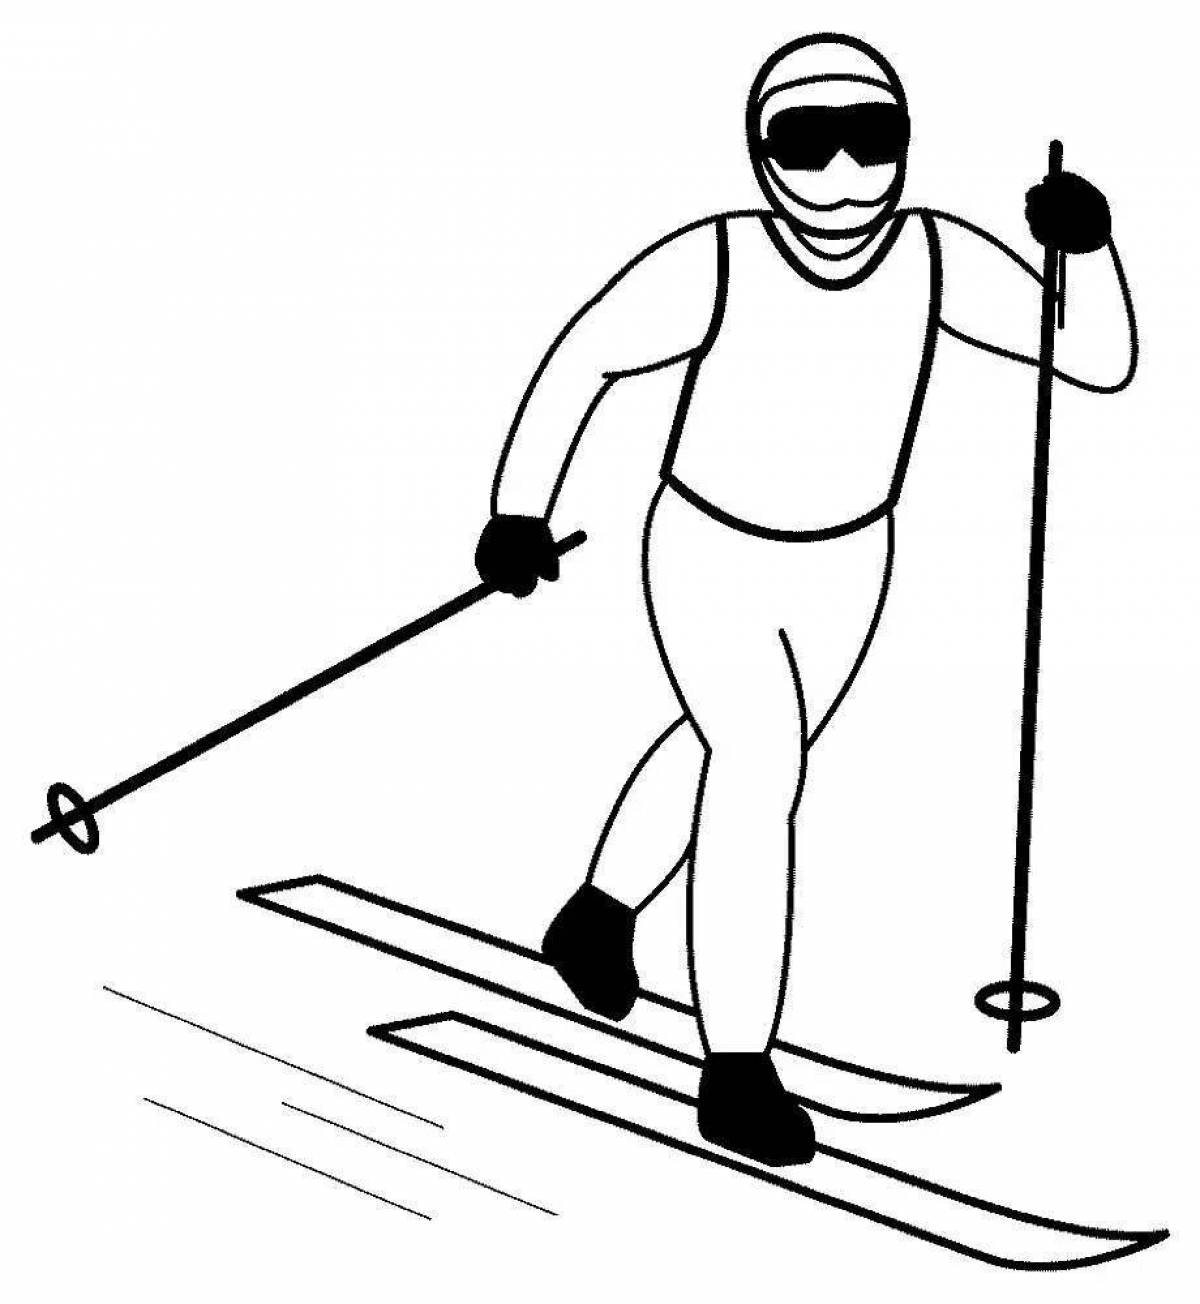 Graceful skier on the move